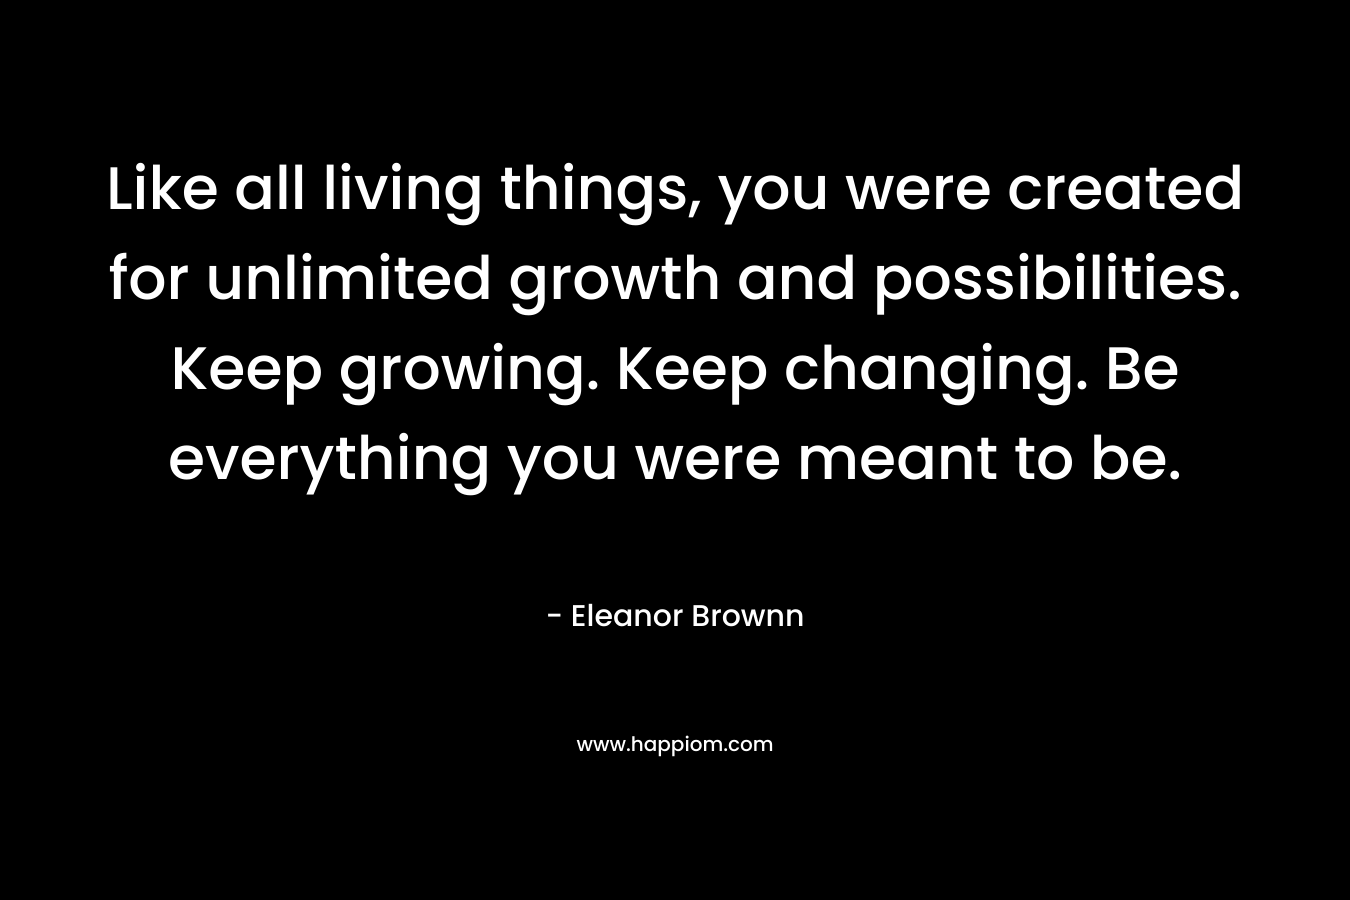 Like all living things, you were created for unlimited growth and possibilities. Keep growing. Keep changing. Be everything you were meant to be.